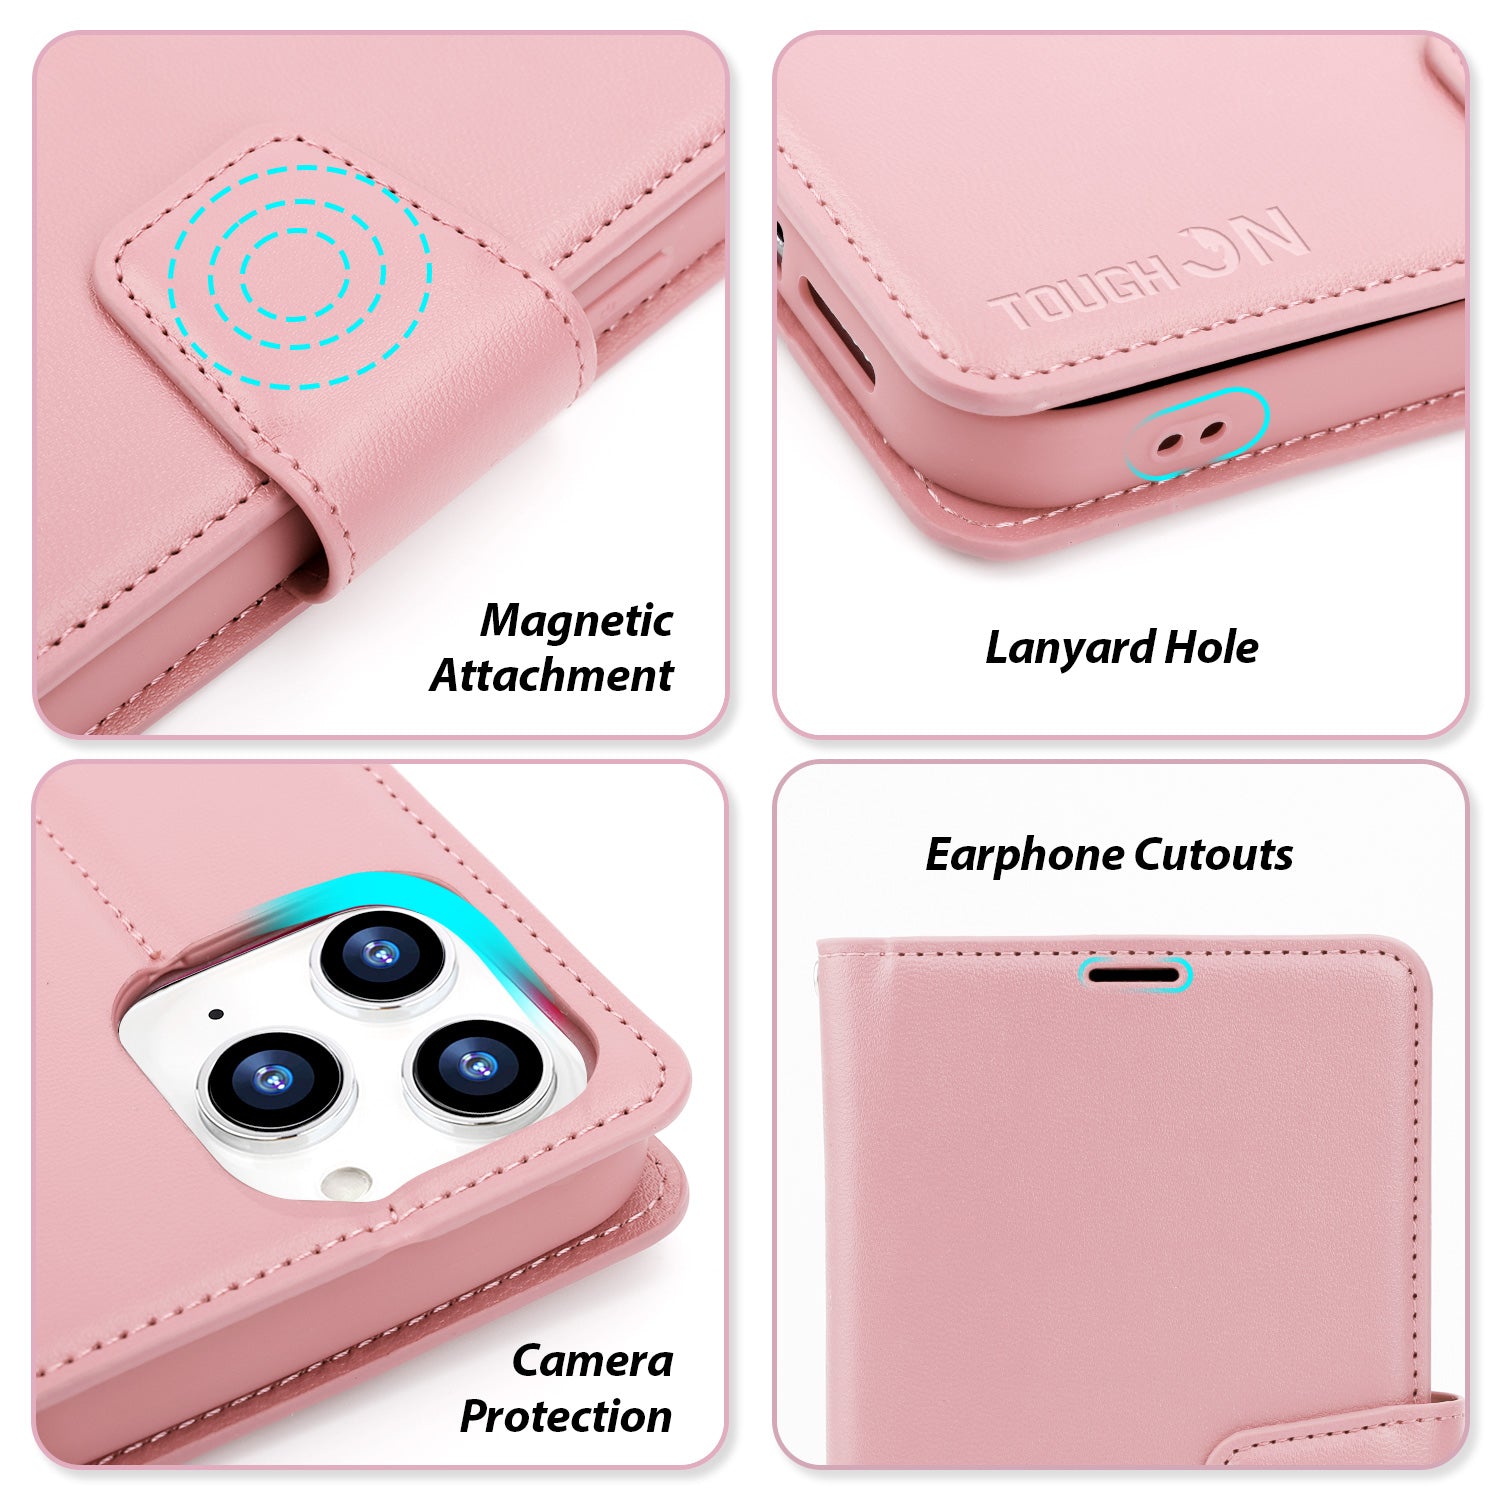 Tough On iPhone X / XS Case Leather Wallet Cover Rose Gold